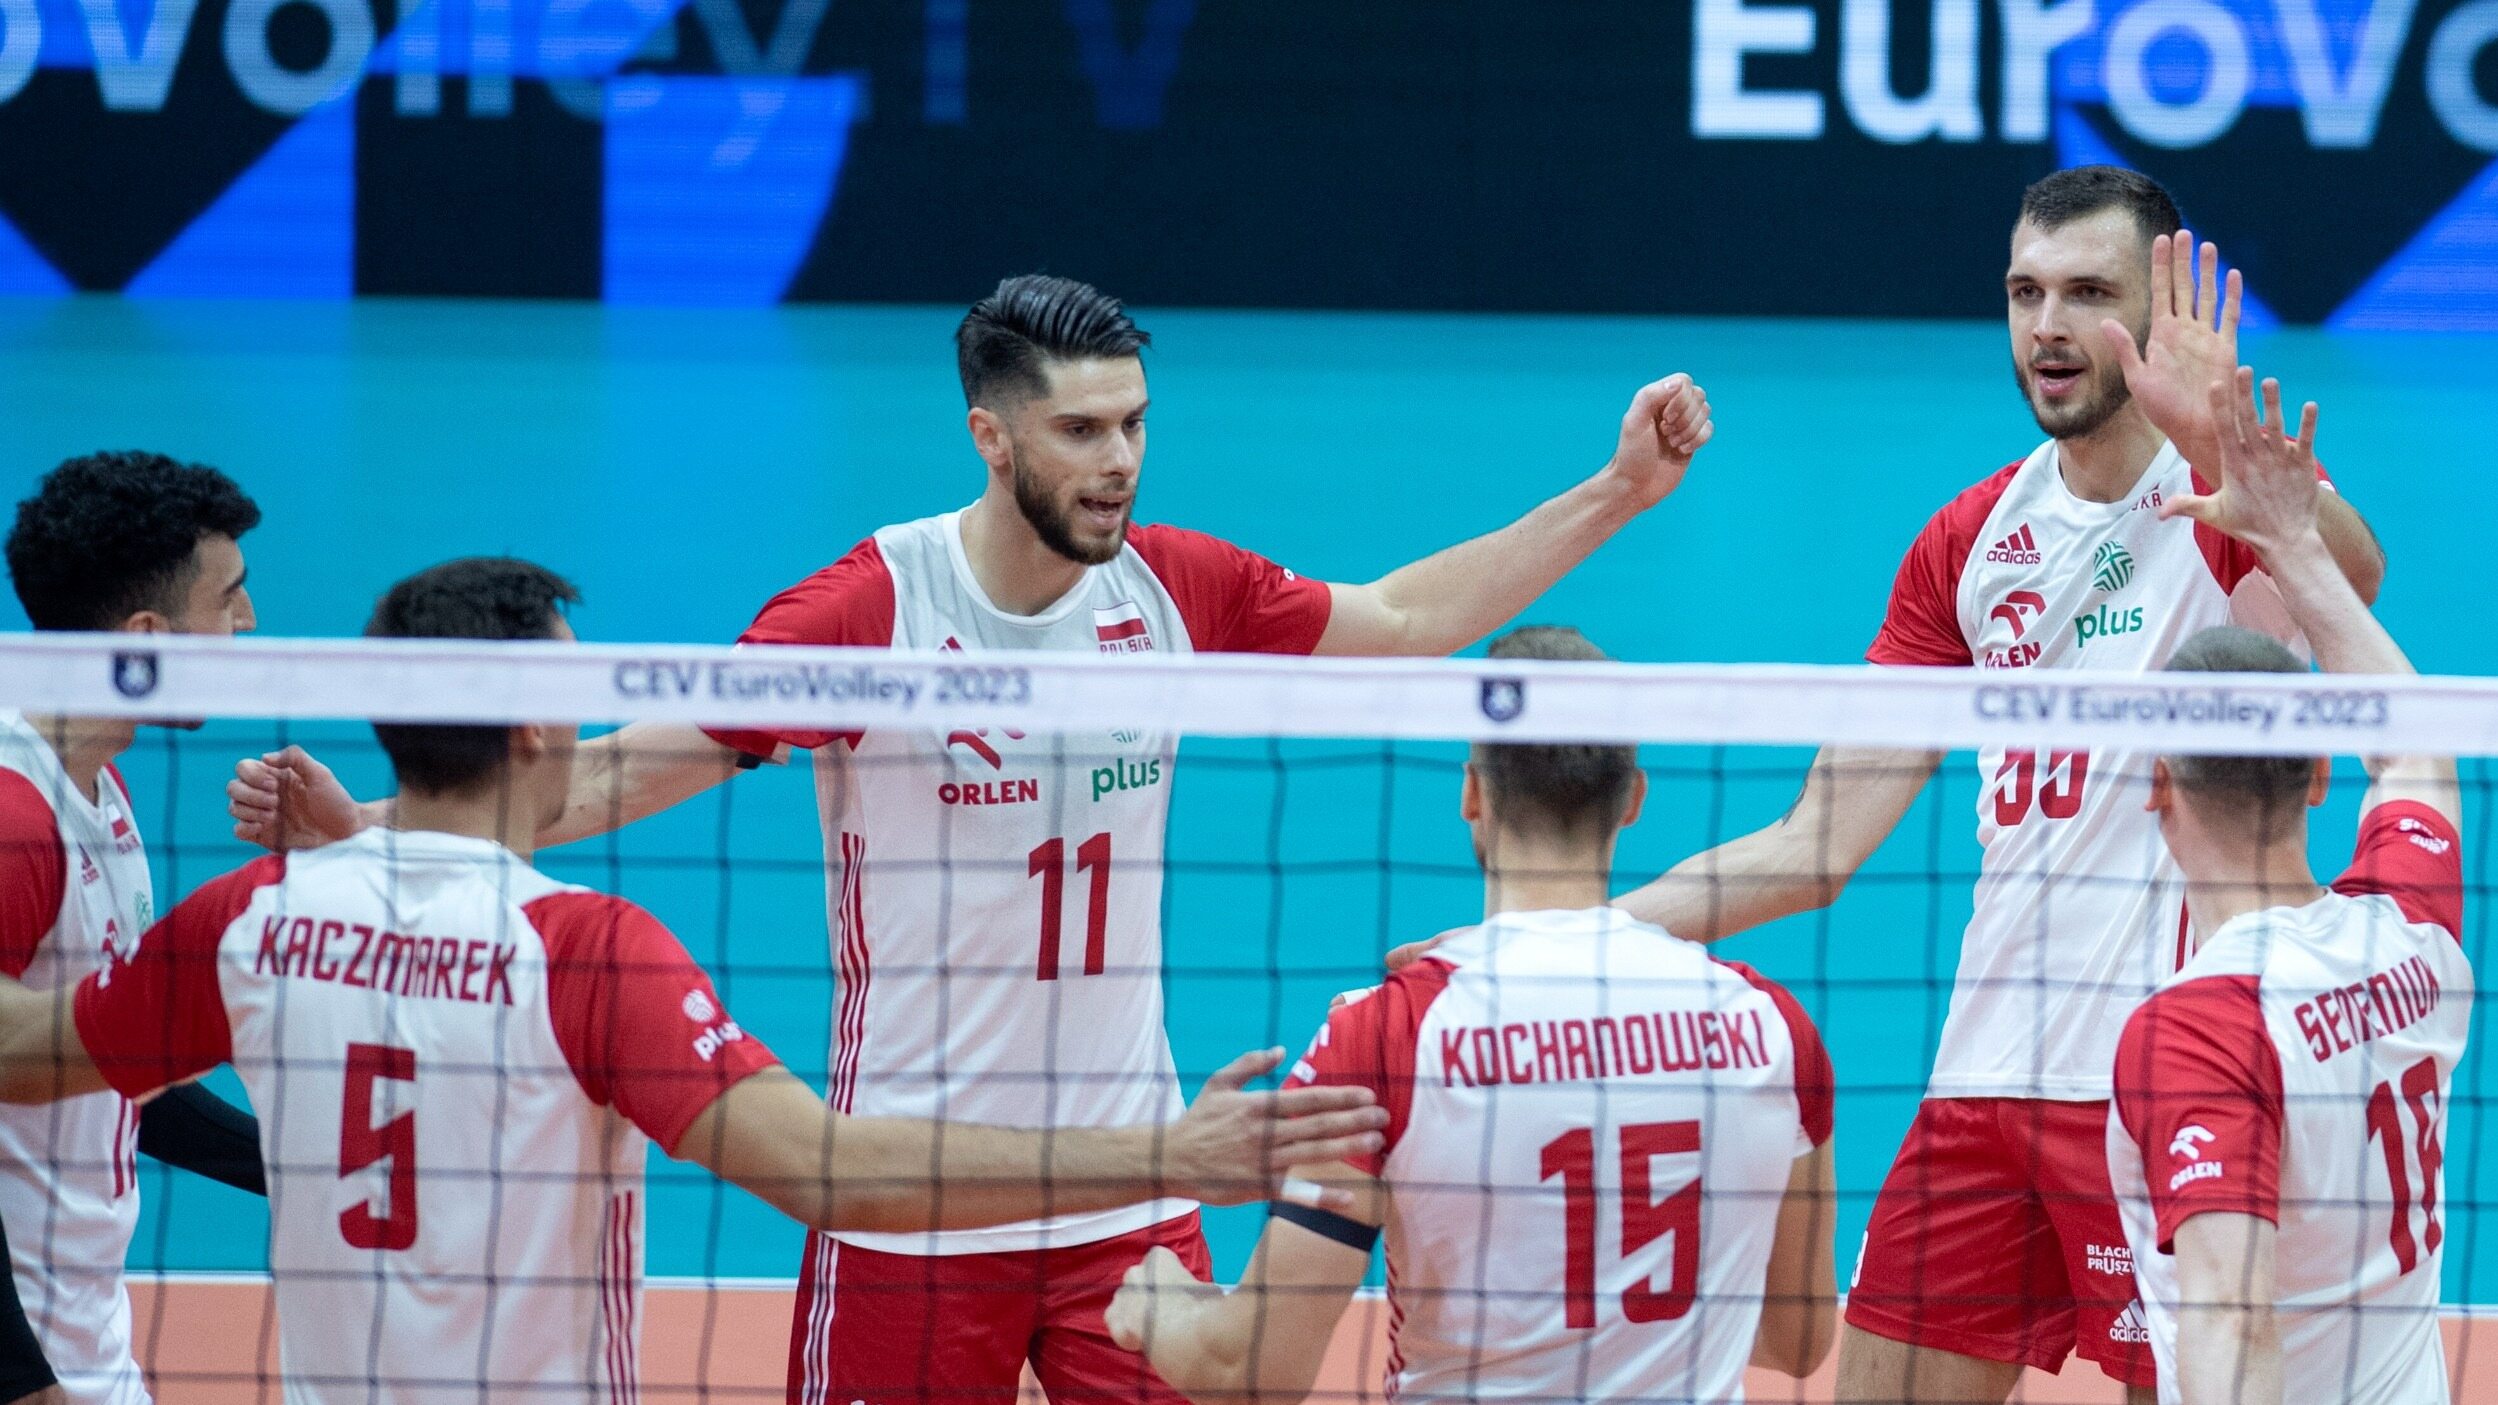 Poland – Netherlands at the European Volleyball Championships.  What time and where can I watch the live broadcast?